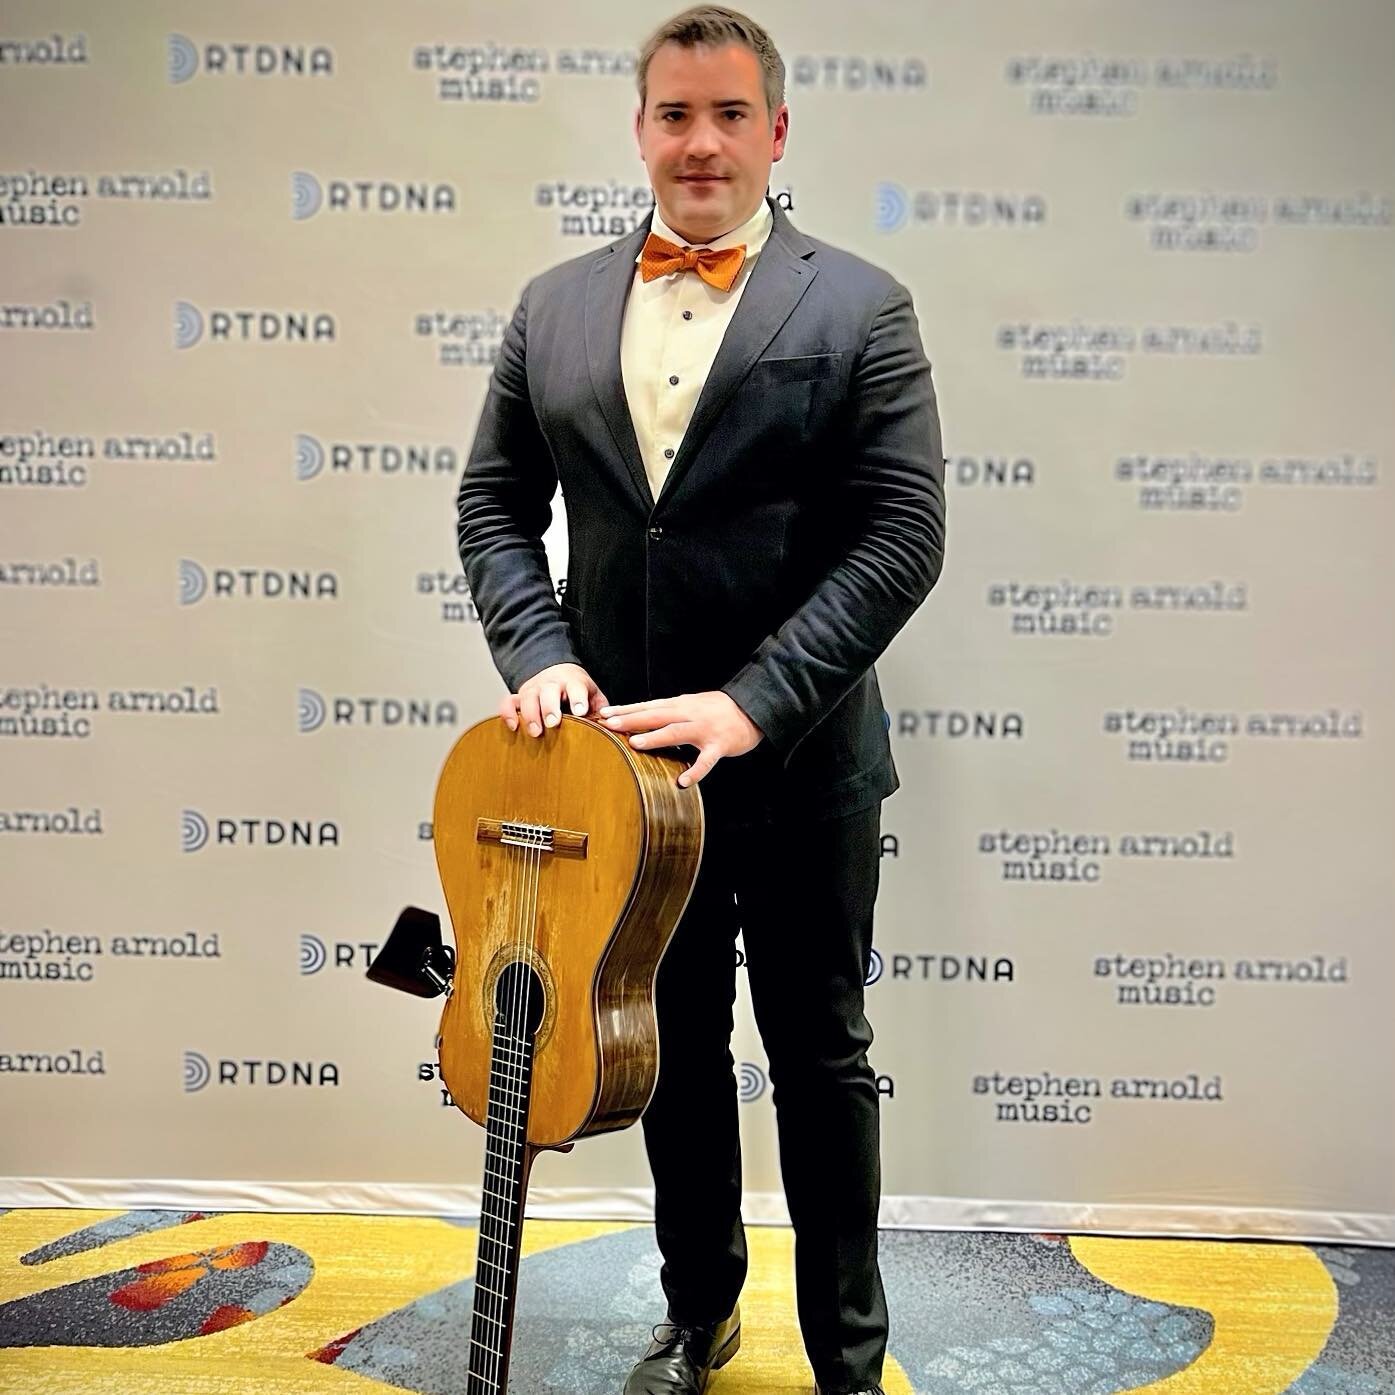 @rtdna.rtdnf 32nd Annual First Amendments Awards hosted by CBS News White House Correspondent @weijia in Washington DC. 

Thank you Stephen Arnold Music.

#guitarist #music #guitarlife #event #dc #livemusic #awards #musicawards #gig #music #richbarry